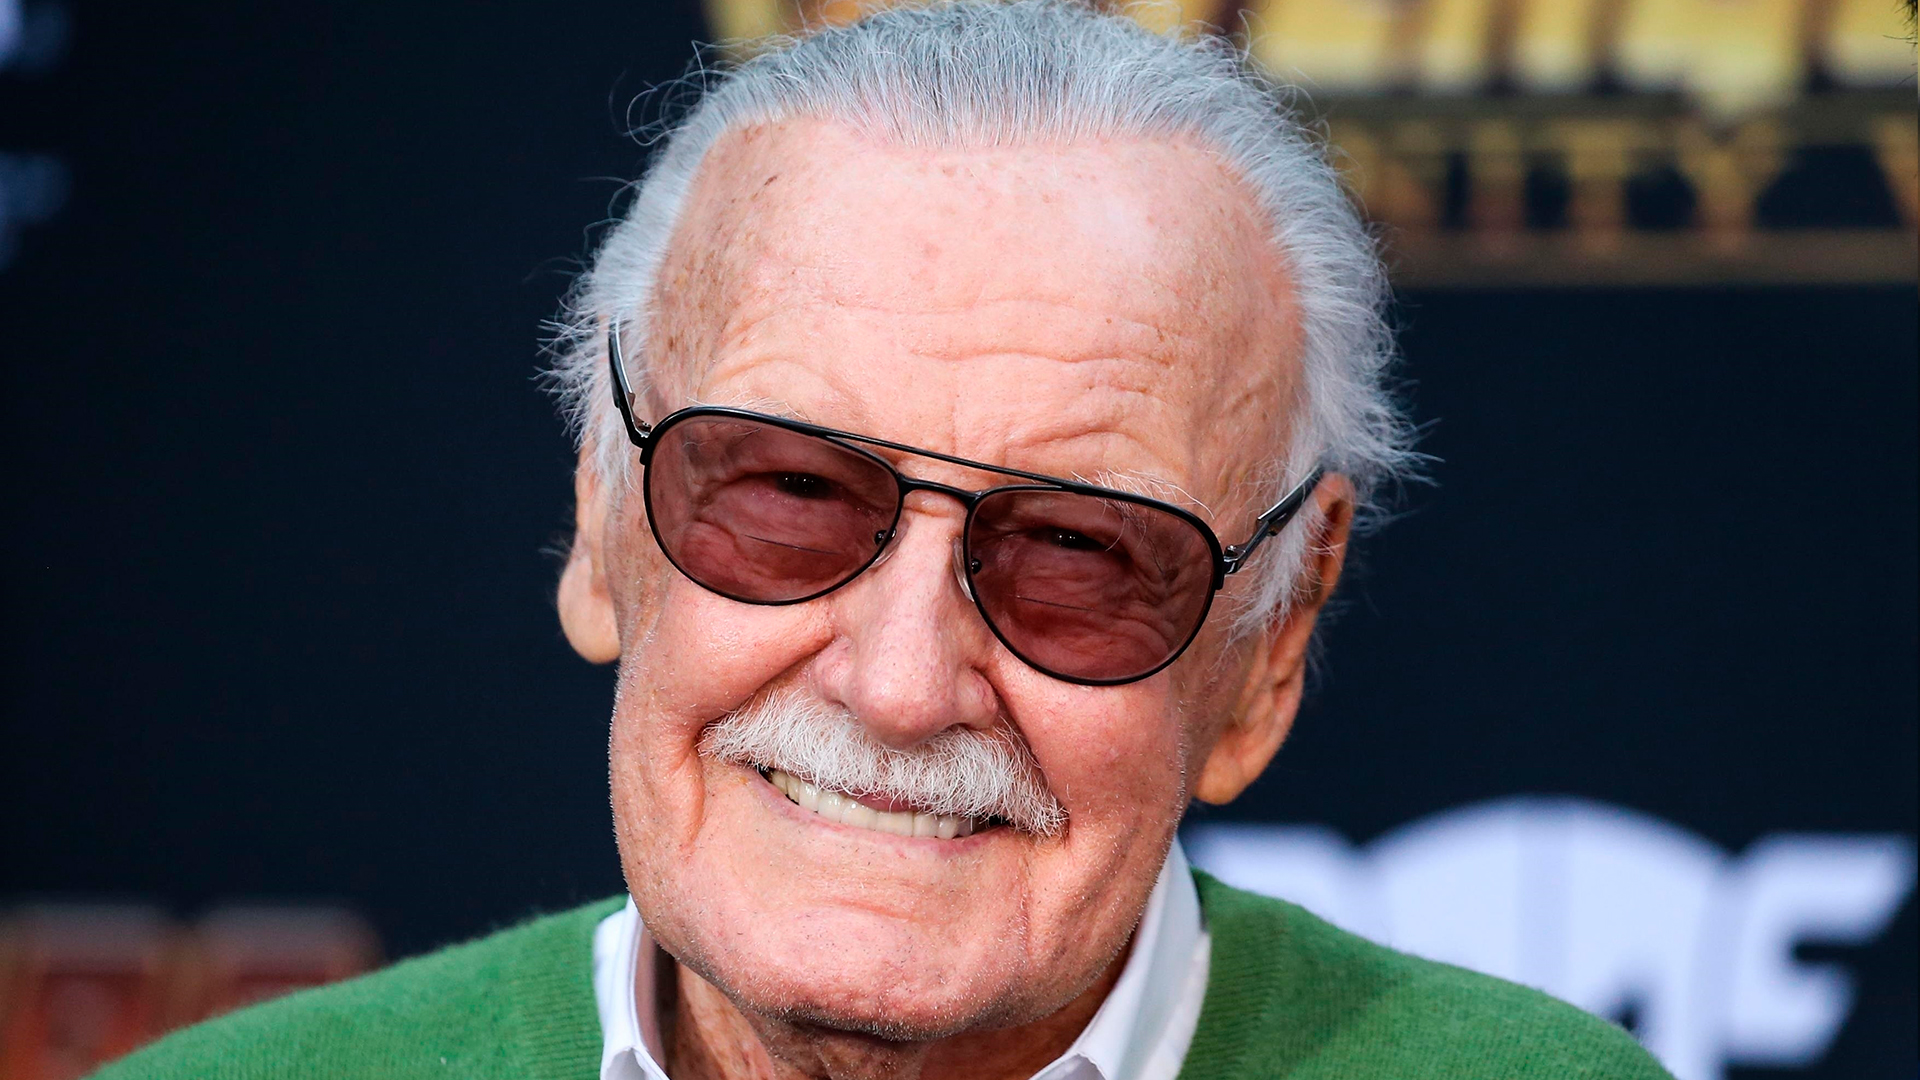 Surprisingly, Stan Lee’s last cameo wasn’t in a Marvel movie